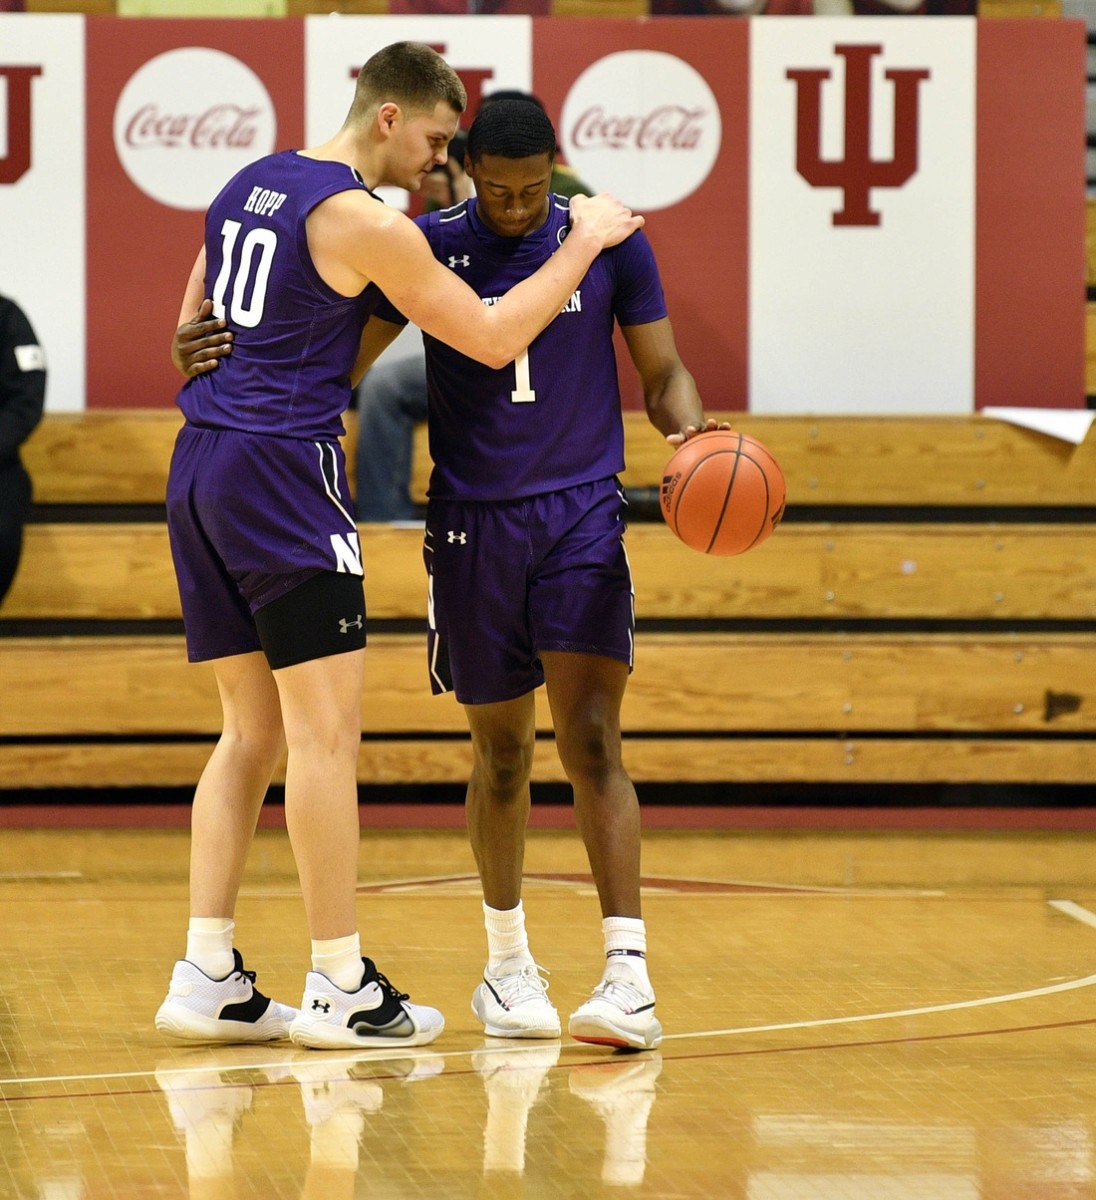 Northwestern guard Chase Audige talks to Miller Kopp during a game at Assembly Hall in December of 2020. Kopp transferred to Indiana last year and will play against his former team for the third time on Sunday. (Mark Lebryk/USA TODAY Sports)